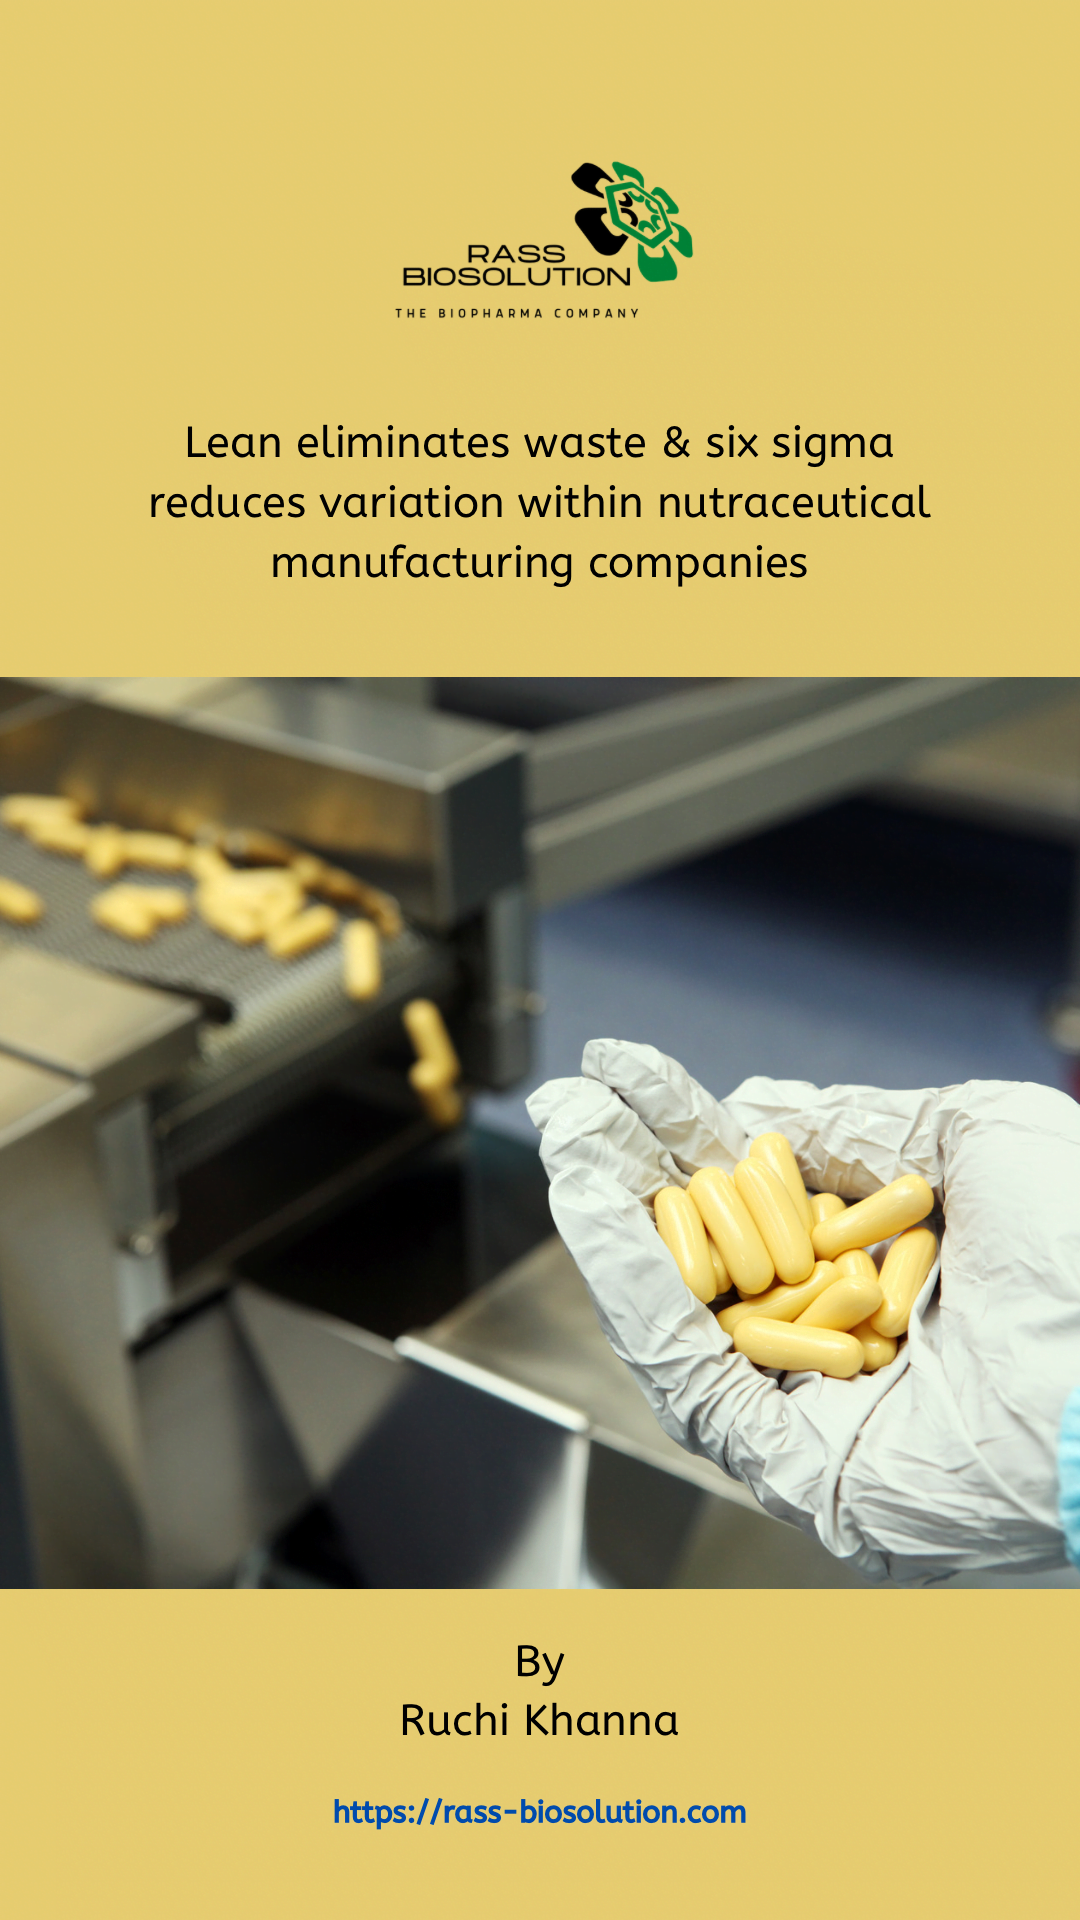 Nutraceutical manufacturing companies